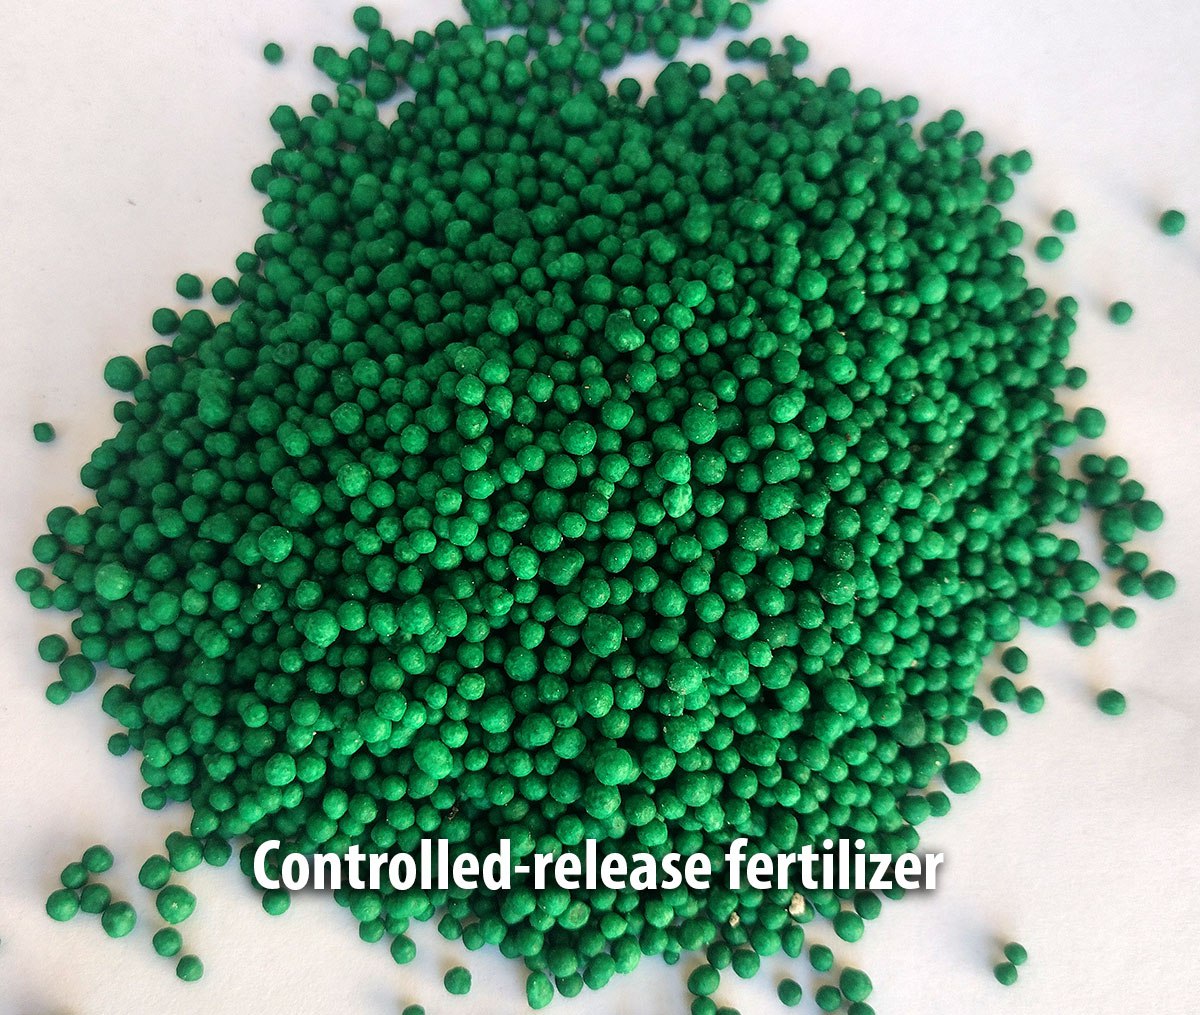  How to learn the Truth about fertilizers